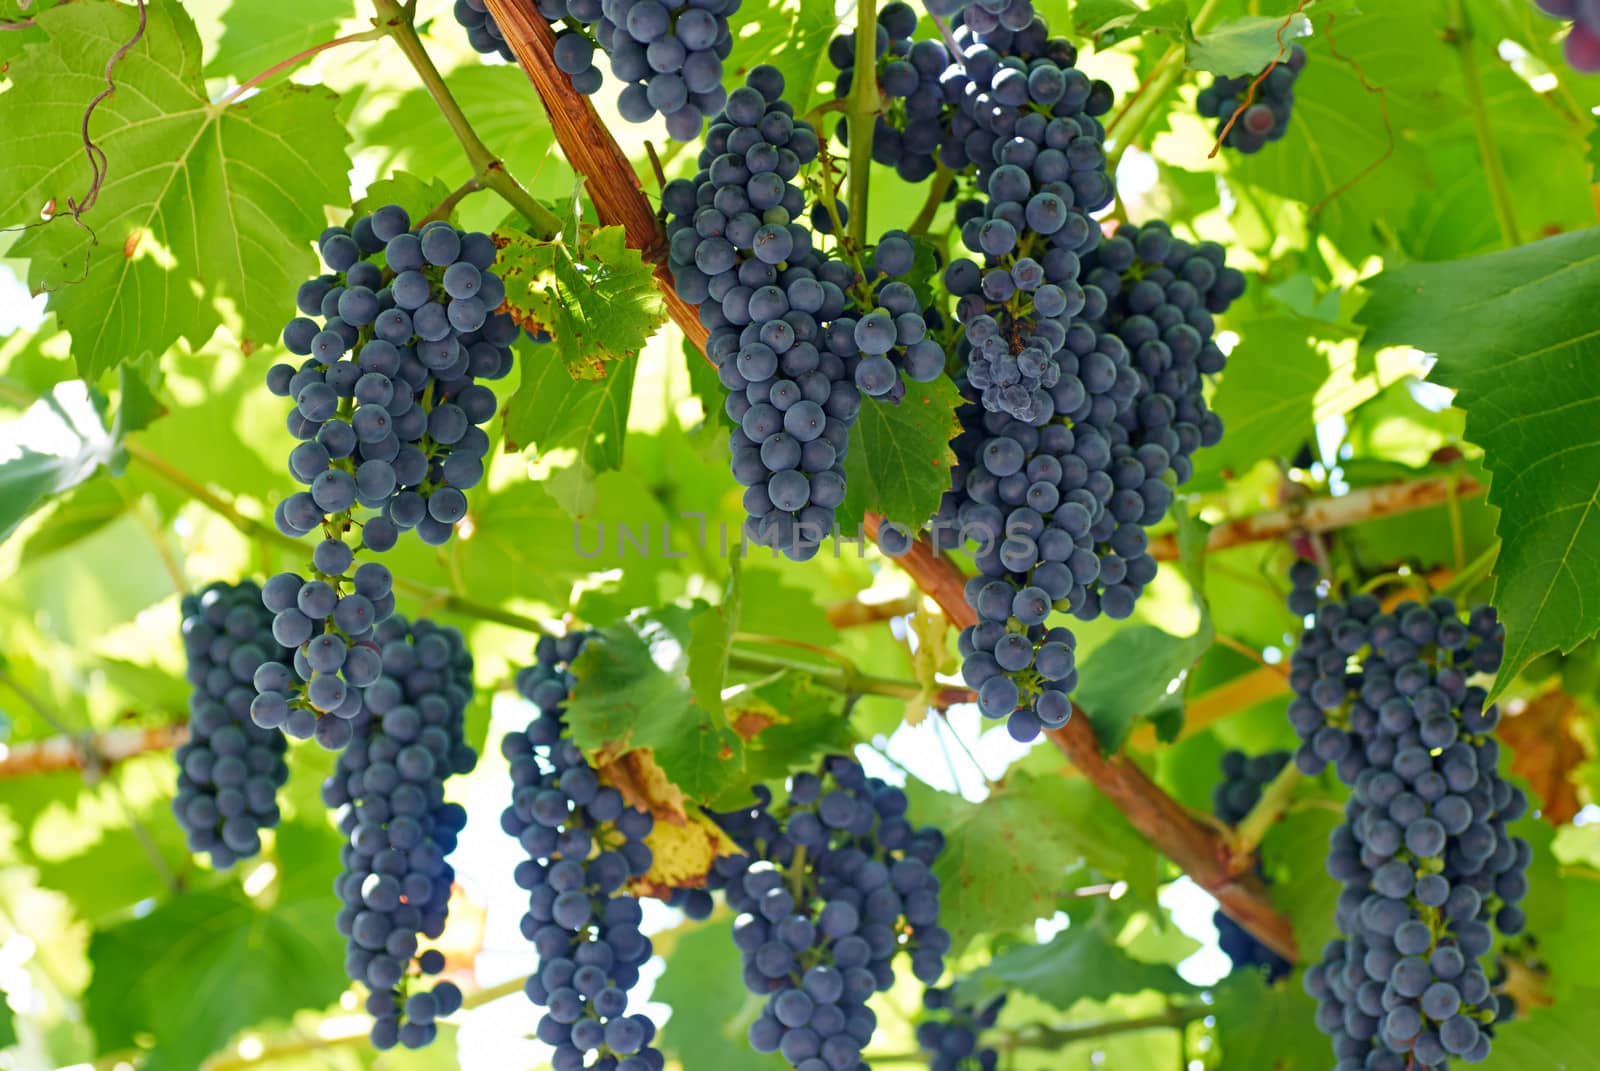 ripening grape clusters on the vine by Zhukow